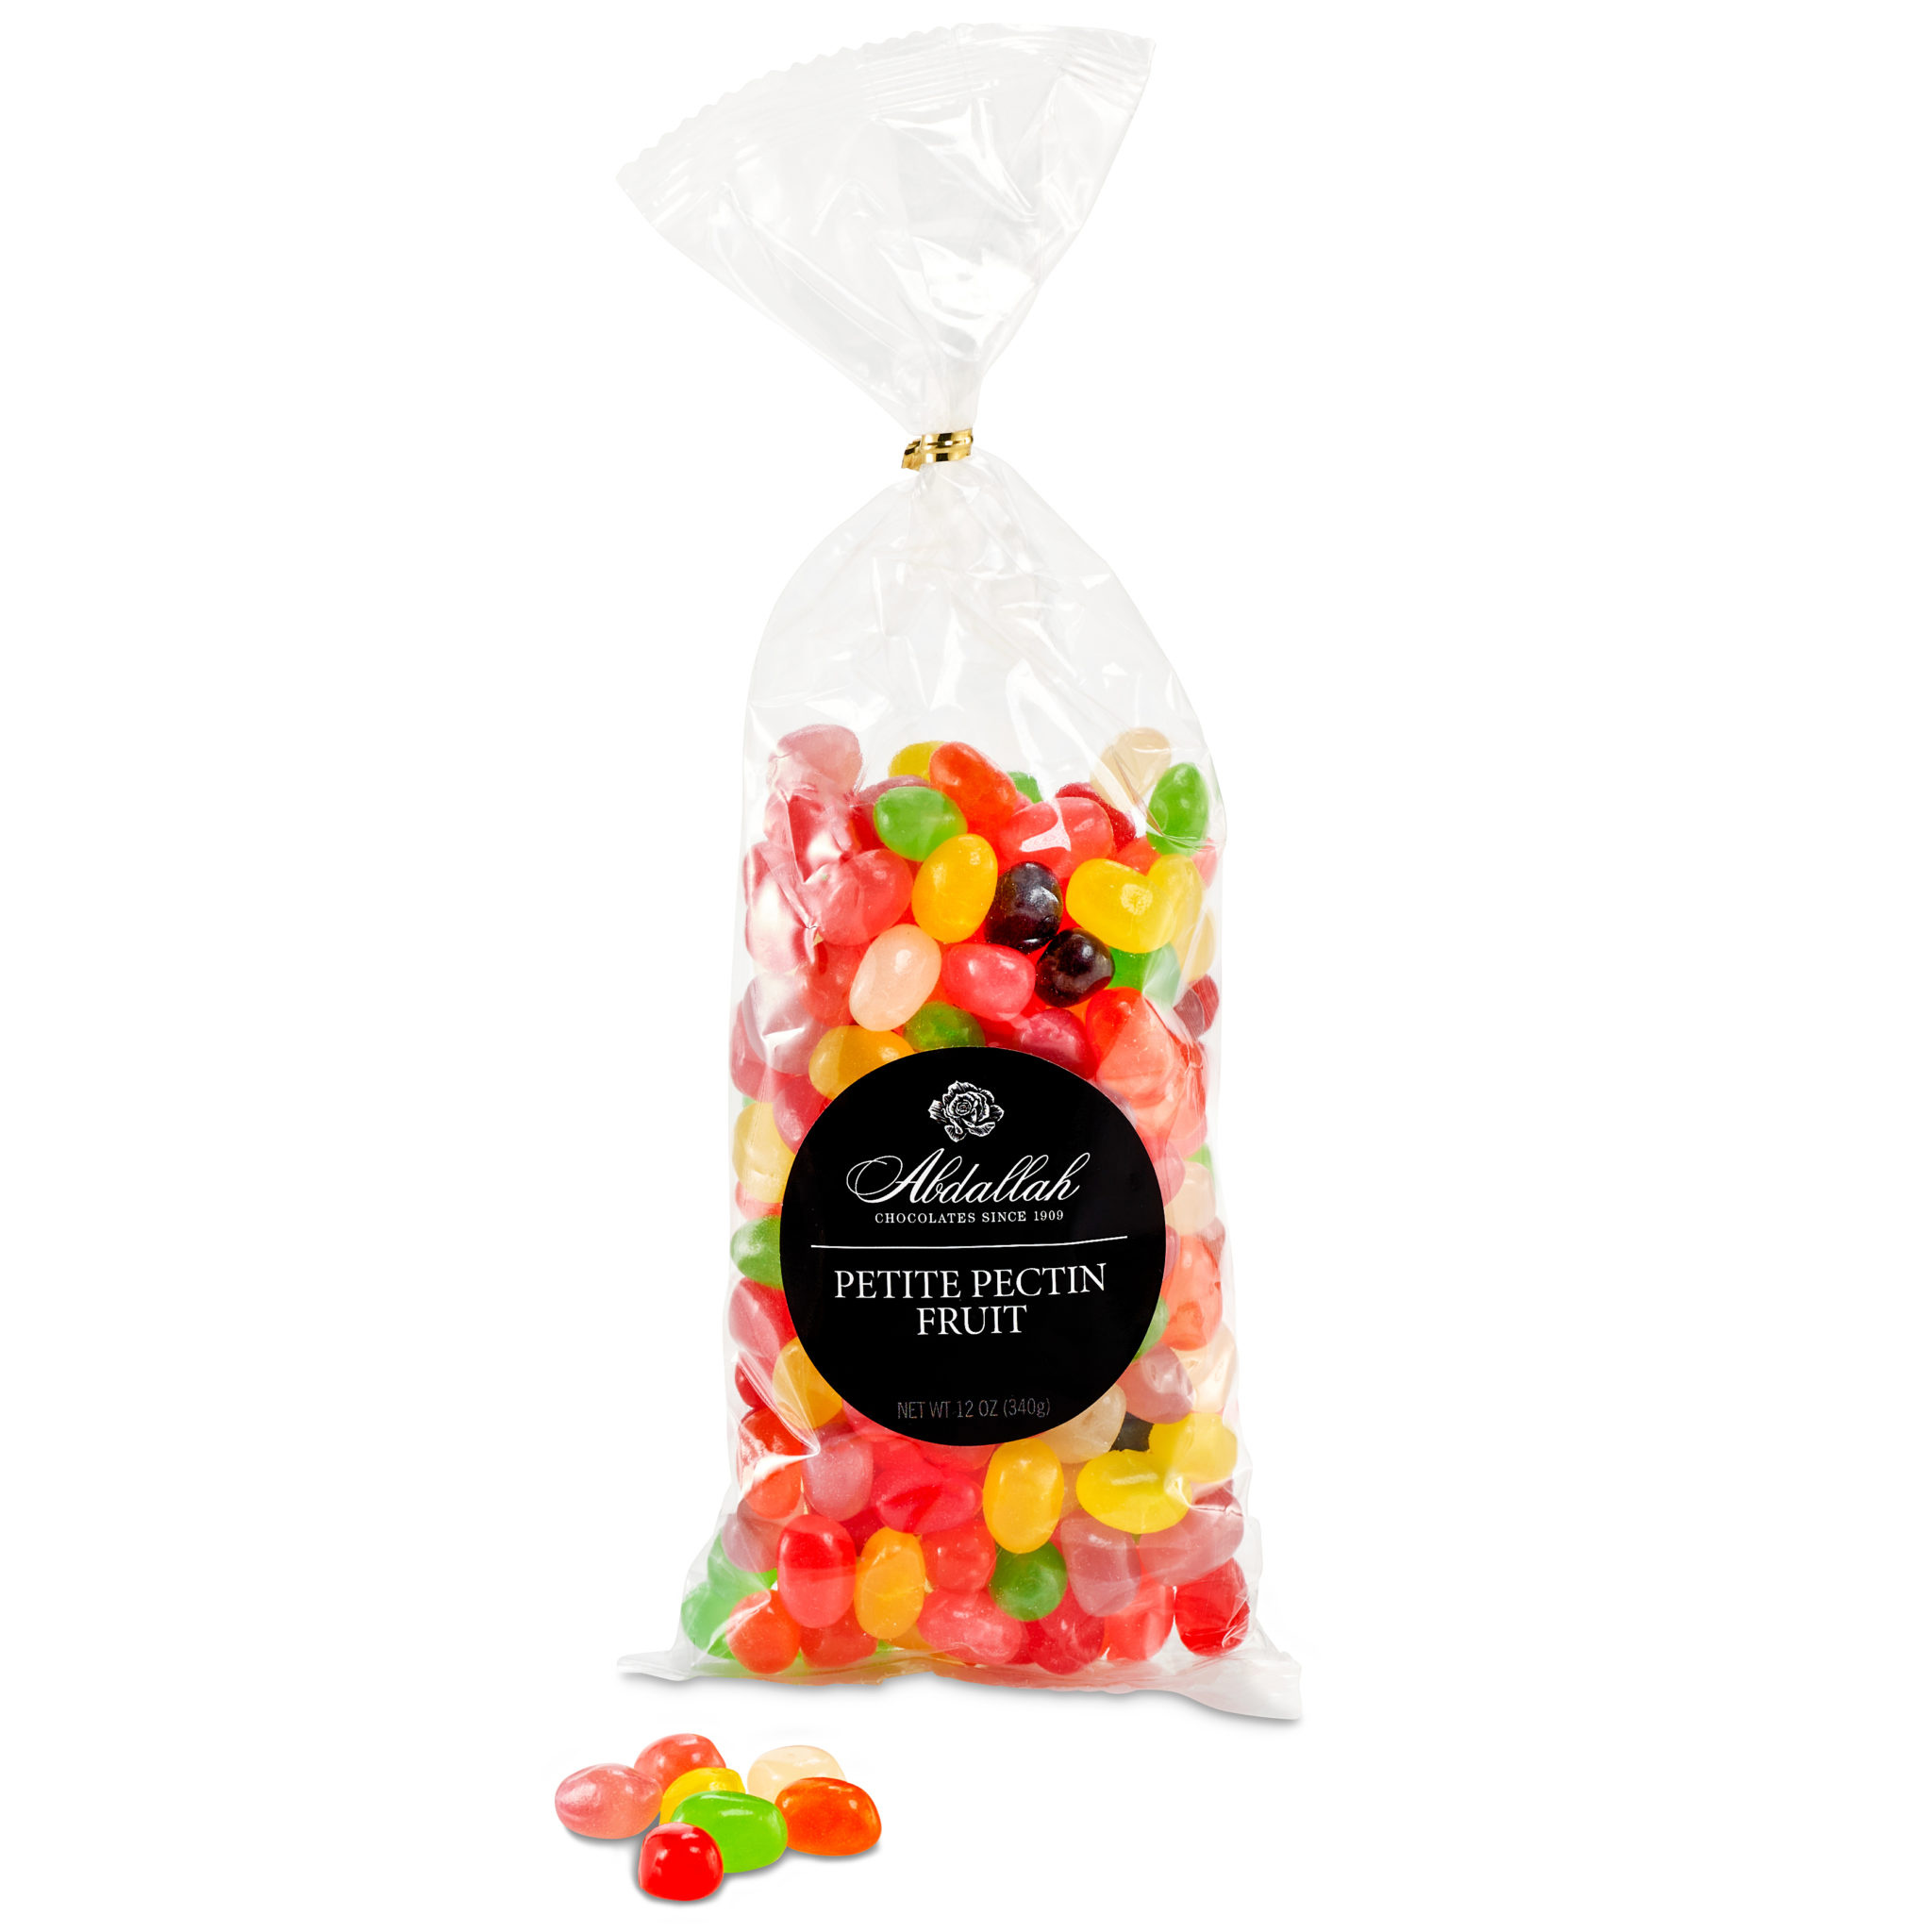 Fruit-flavored jelly beans, Burst of freshness, Gourmet candies, Premium confection, 2050x2050 HD Phone